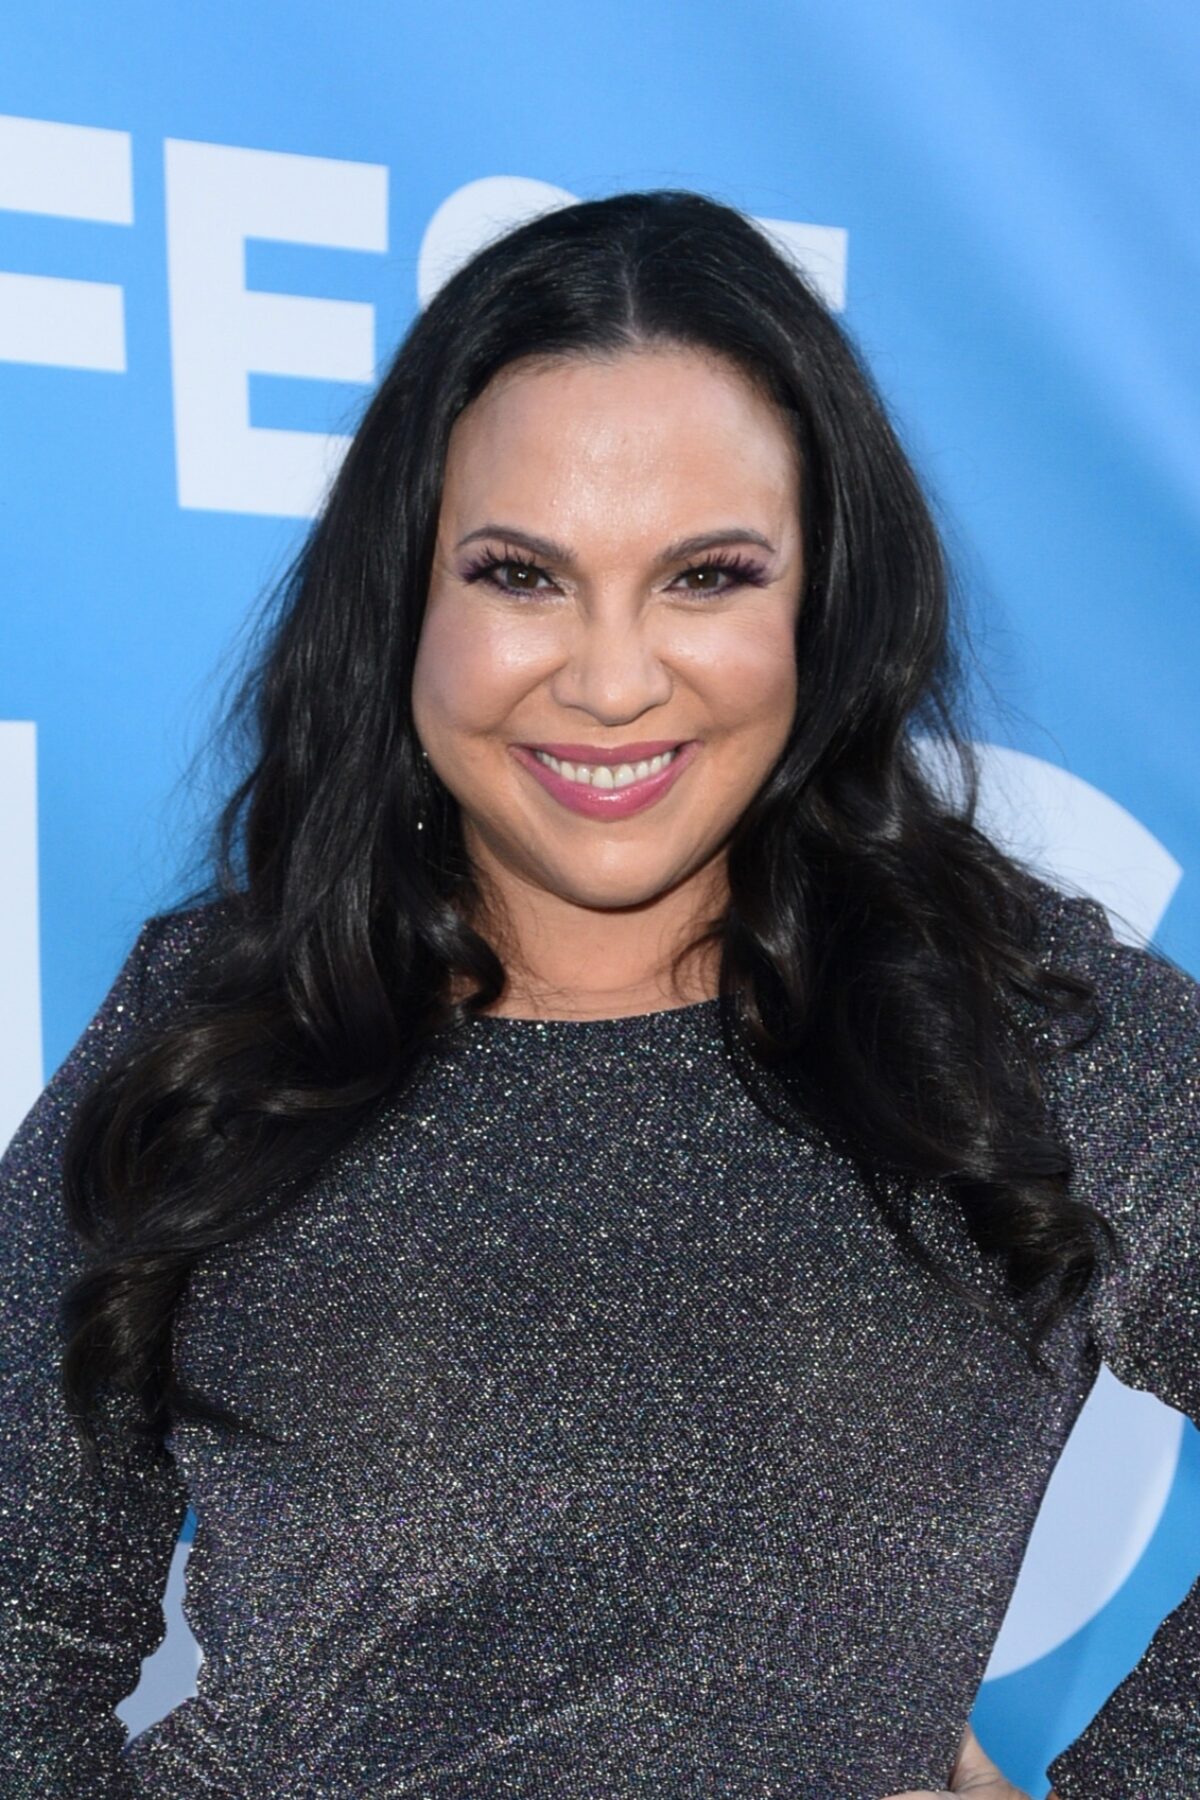 LOS ANGELES, CALIFORNIA - APRIL 08: Gloria Calderon Kellett attends Outfest Fusion Opening Night Gala at the Japanese American Cultural & Community Center on April 08, 2022 in Los Angeles, California. (Photo by Vivien Killilea/Getty Images for Outfest)